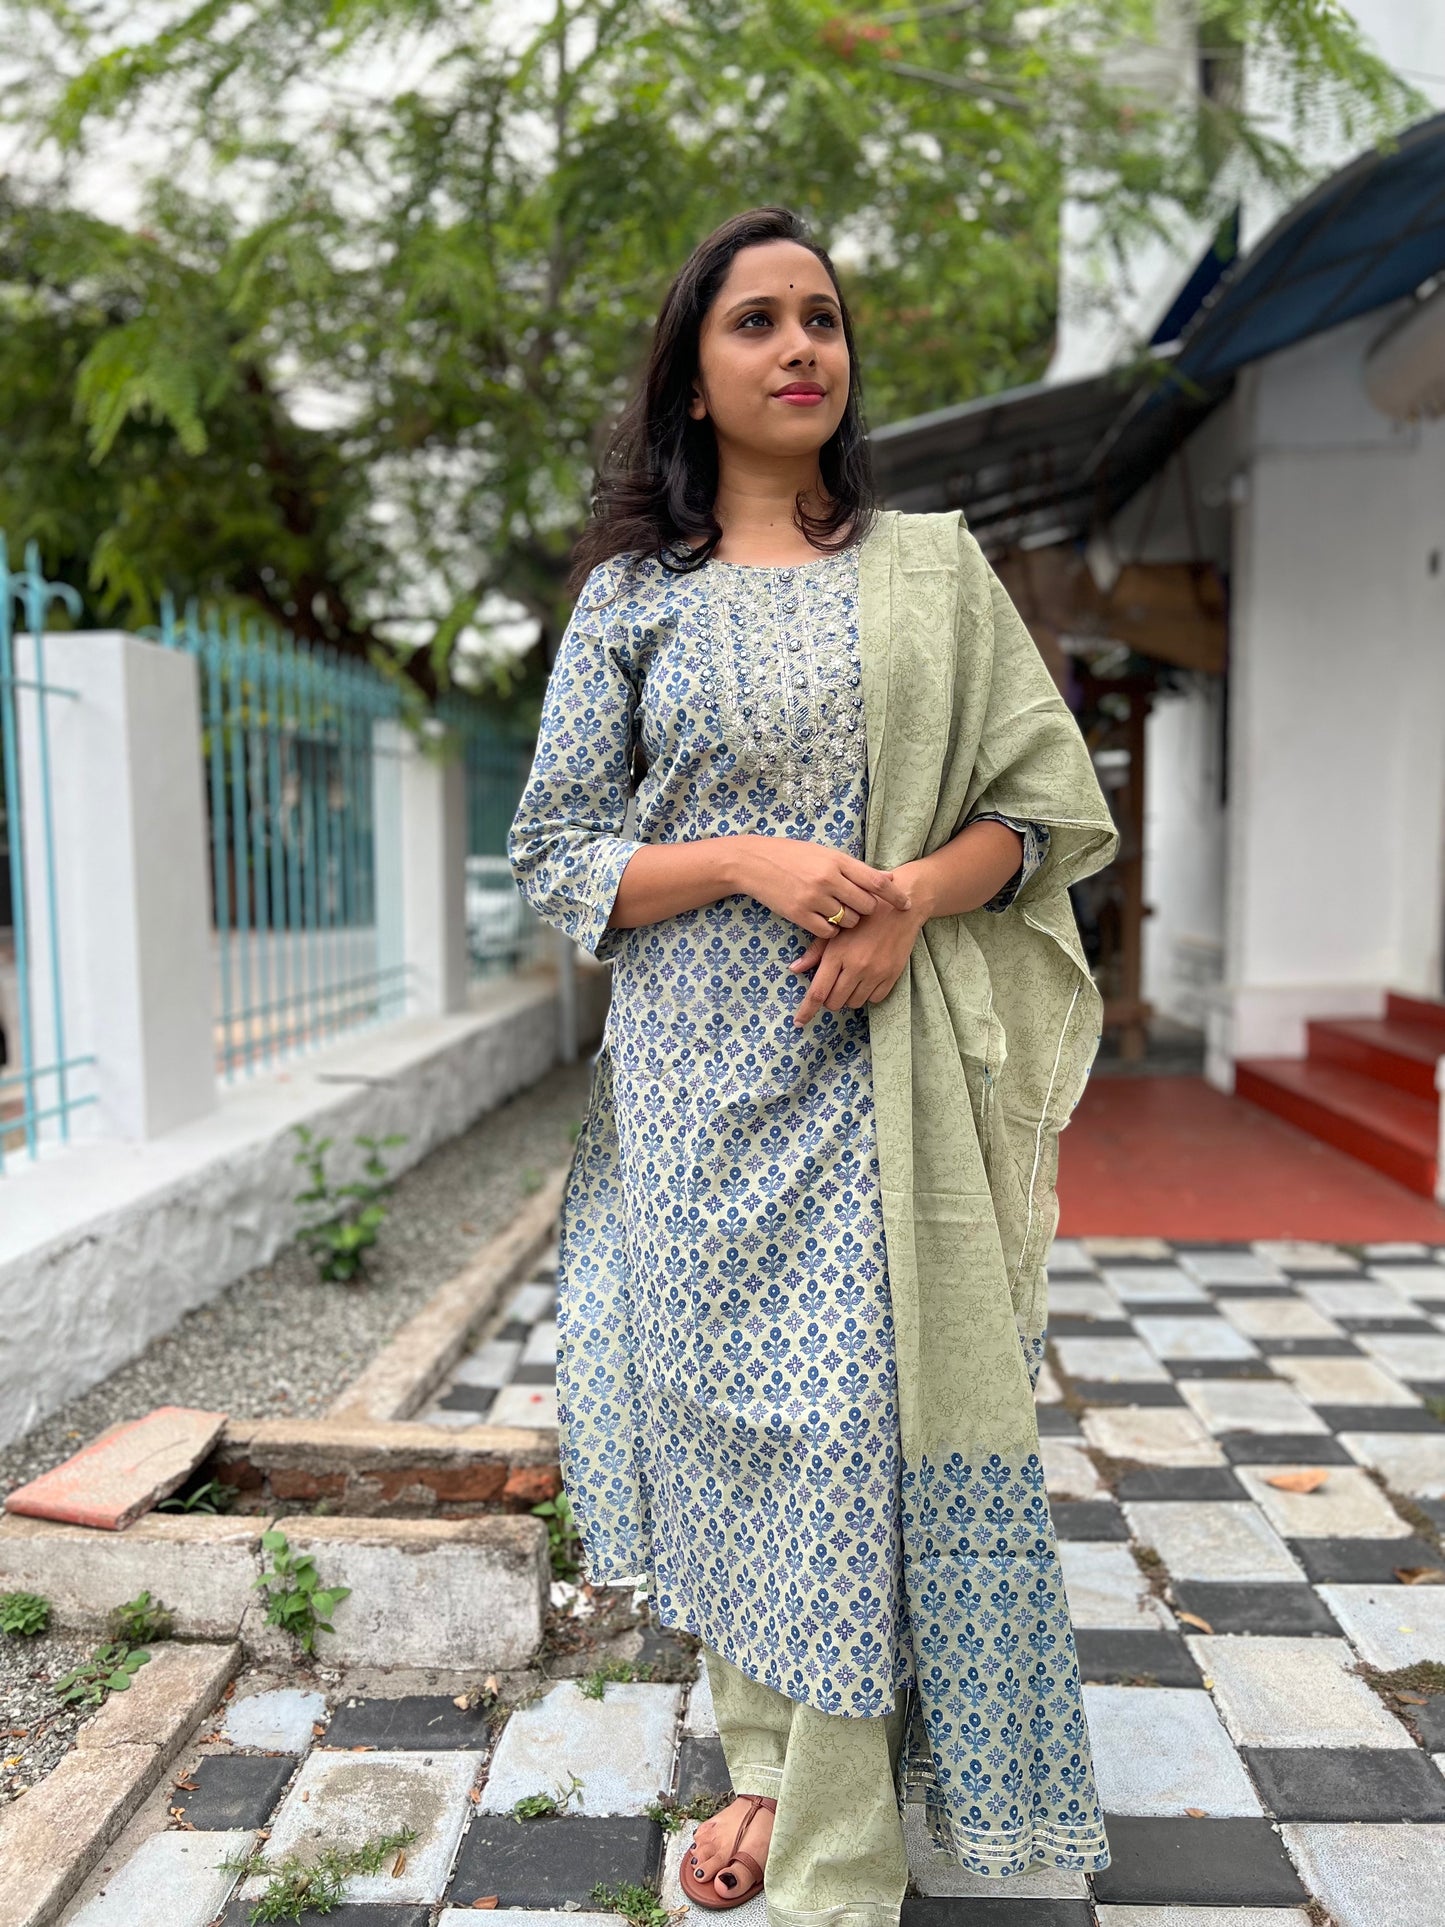 Southloom Stitched Cotton Salwar Set in Greyish Green with Blue Floral Prints